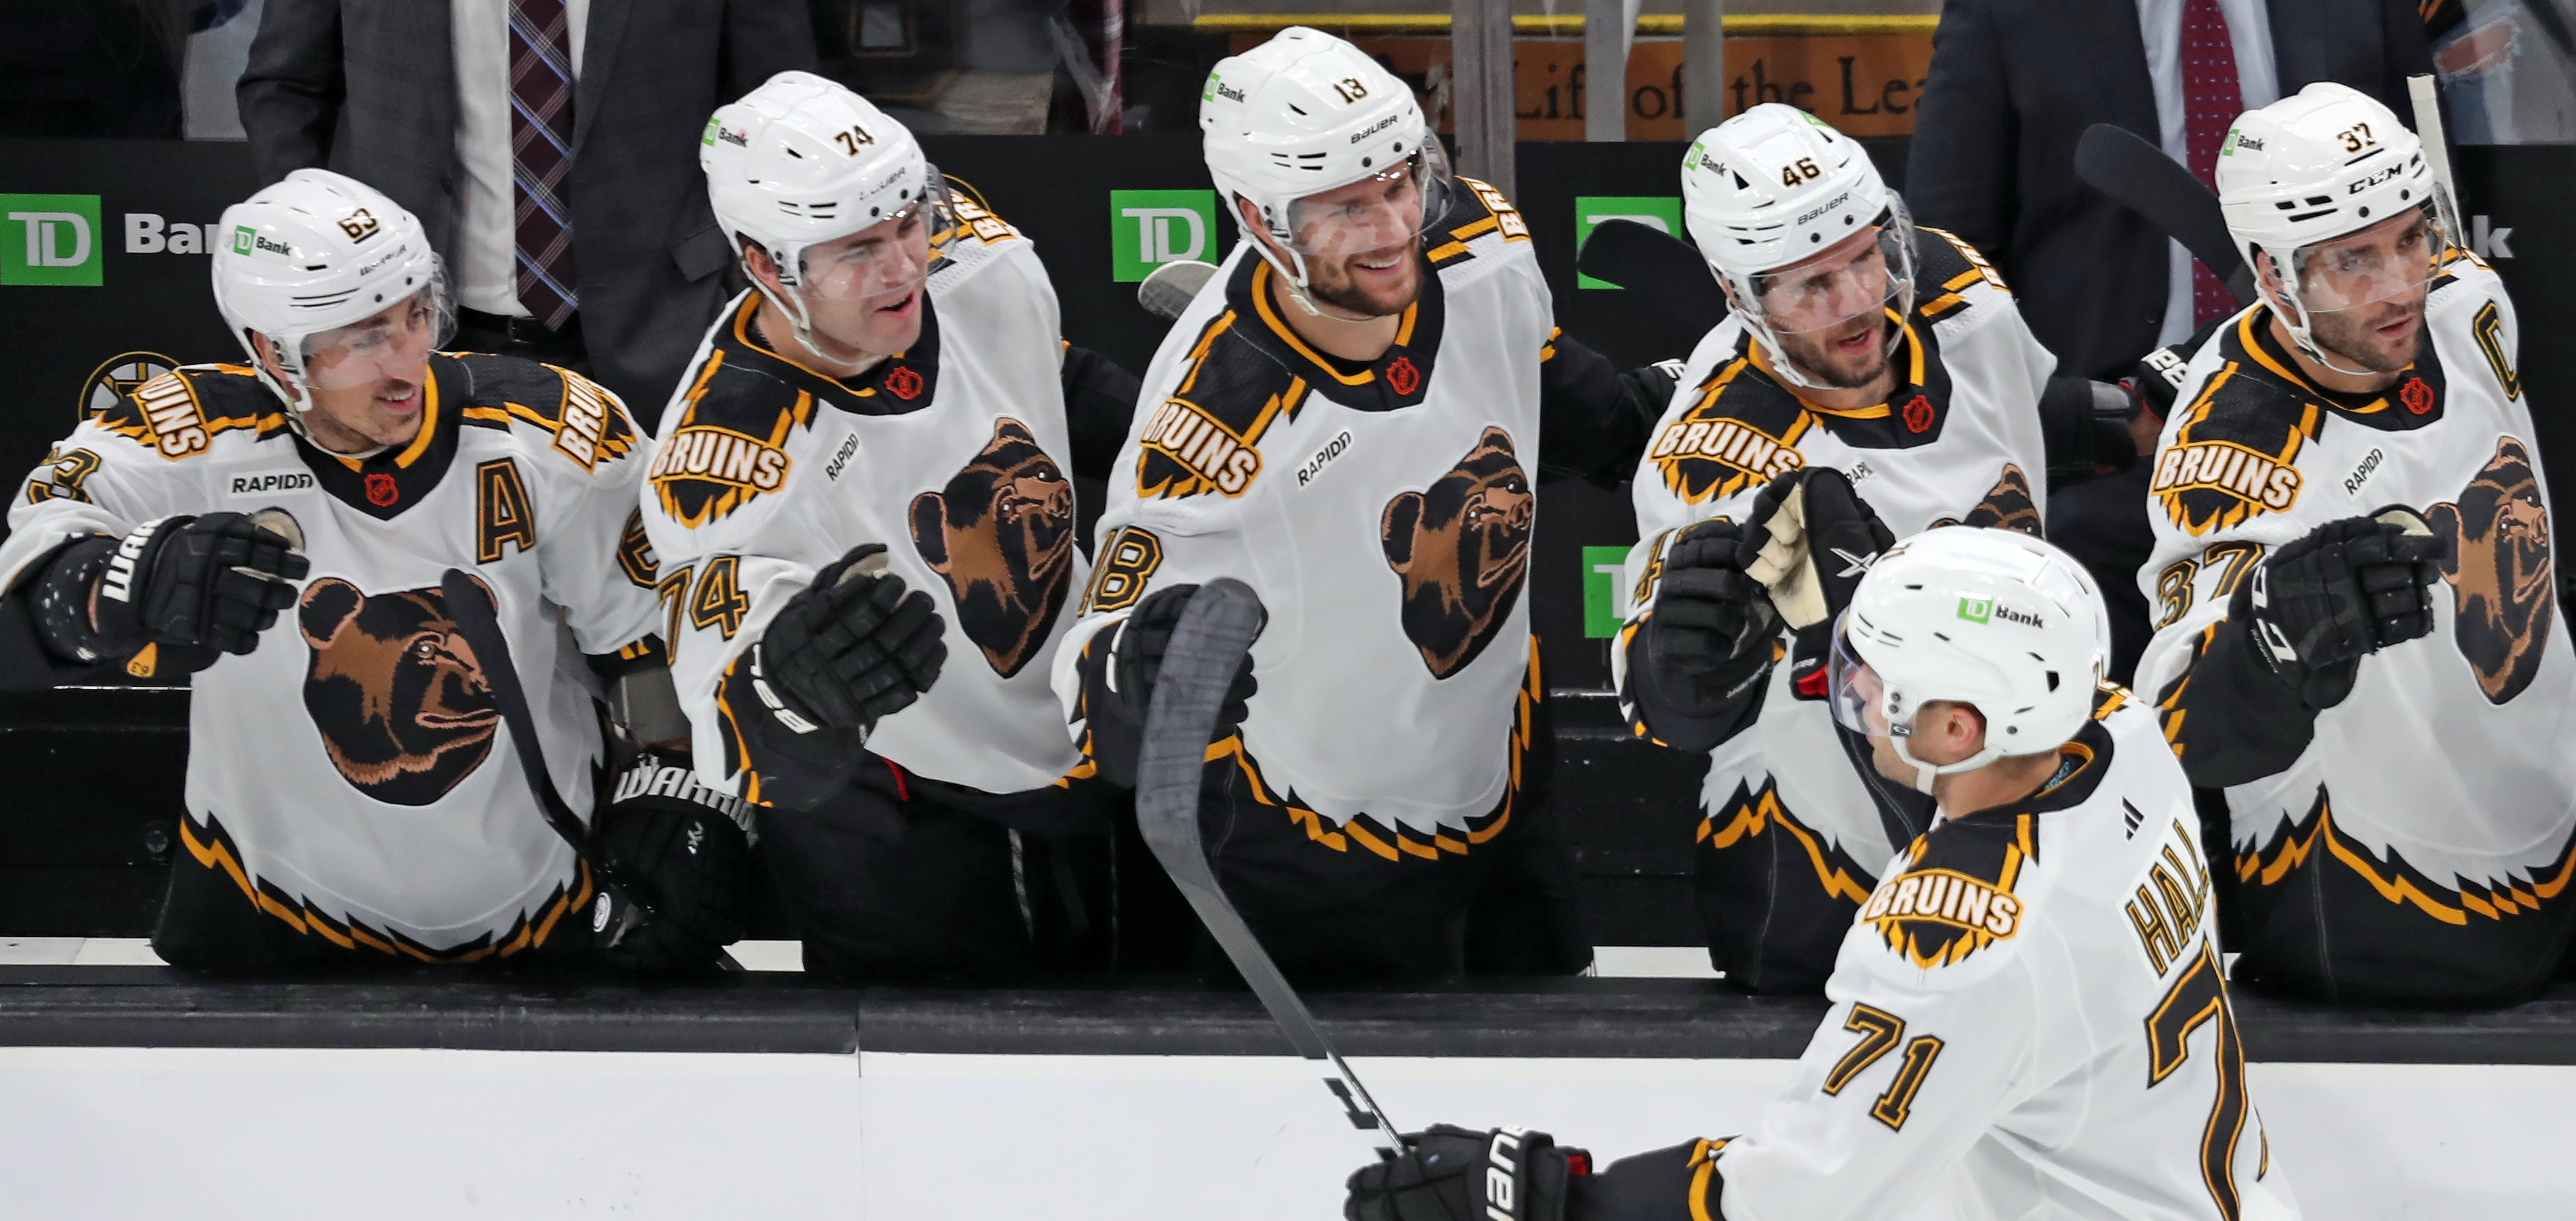 Well this is awkward: Boston Bruins forced to make wardrobe change due to  uniform gaffe before game, Trending